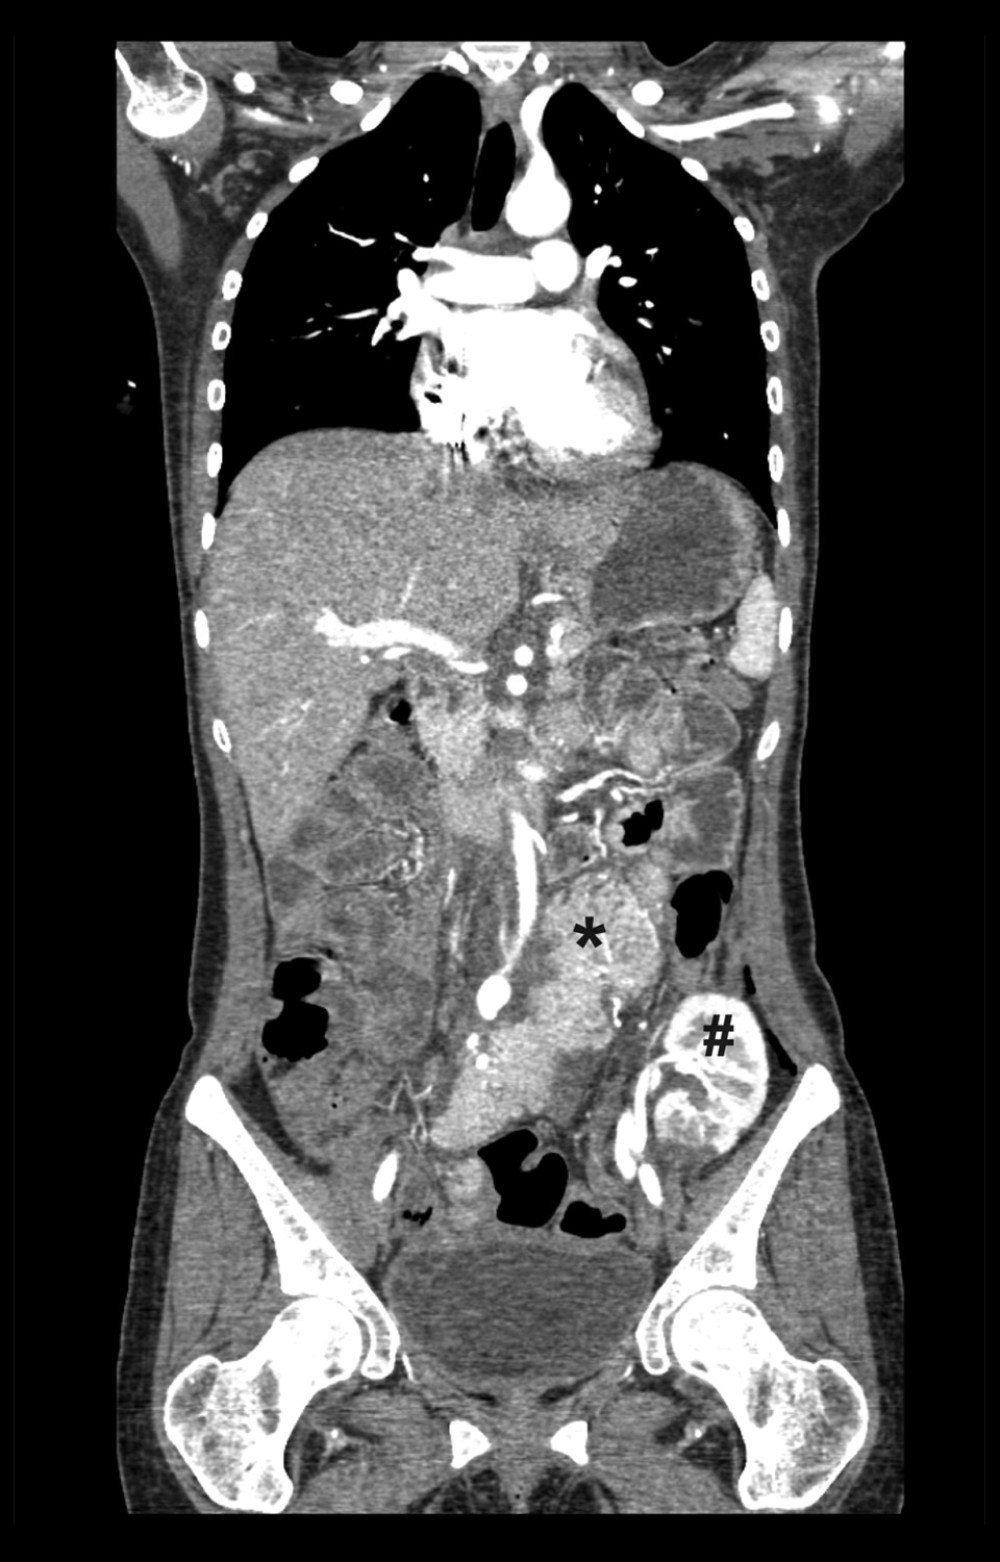 Radiologic followup after combined kidney-pancreas transplantation. Computed tomography prior to pregnancy showing the functional and well-perfused pancreas (marked with a black asterisk) and kidney grafts (marked with black pound sign).